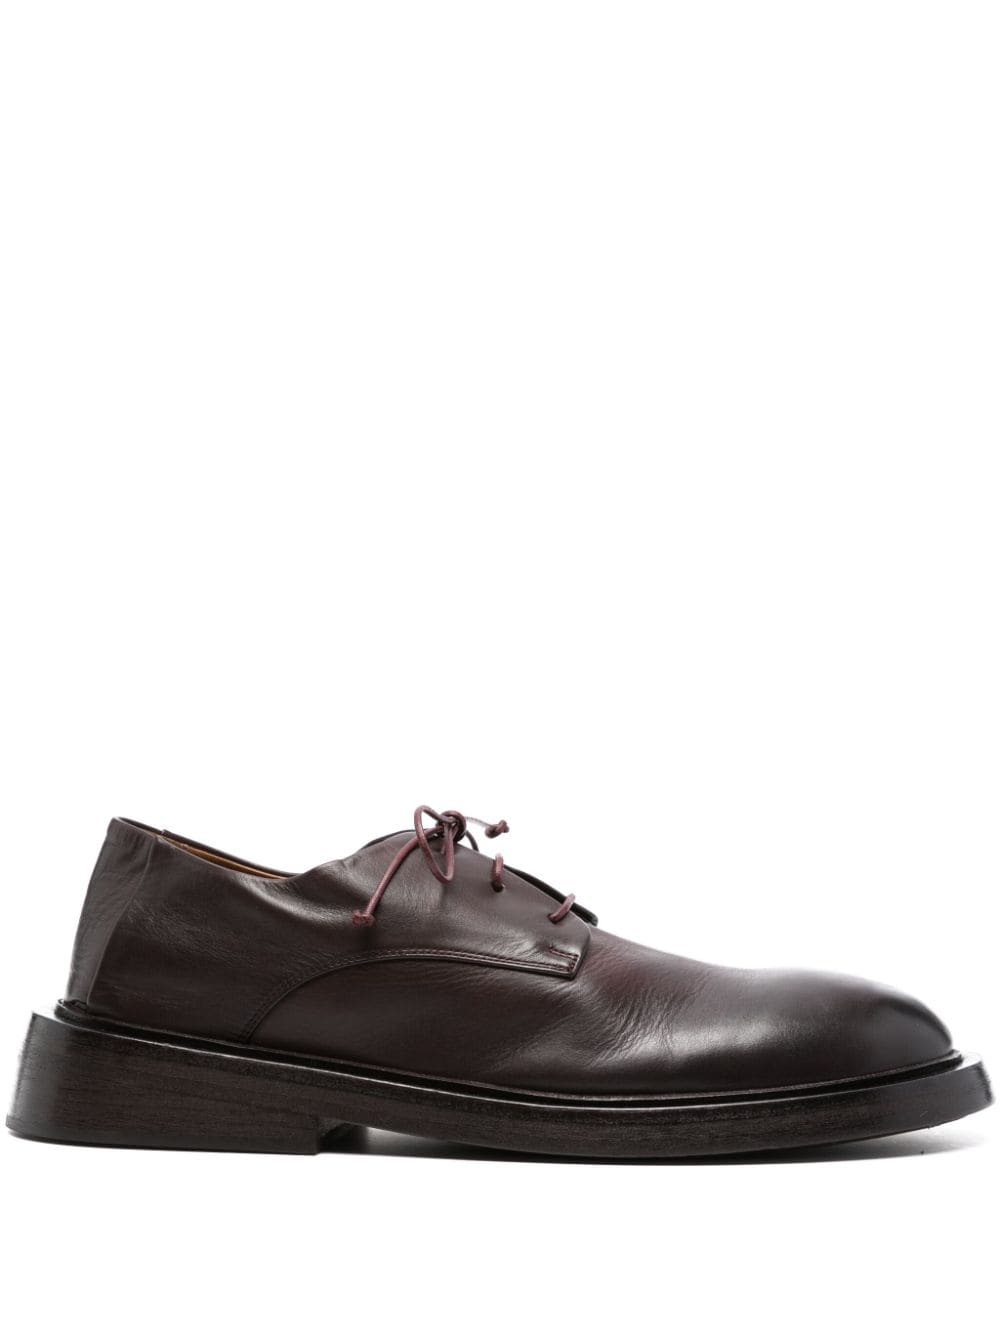 Marsèll lace-up leather oxford shoes - Brown von Marsèll